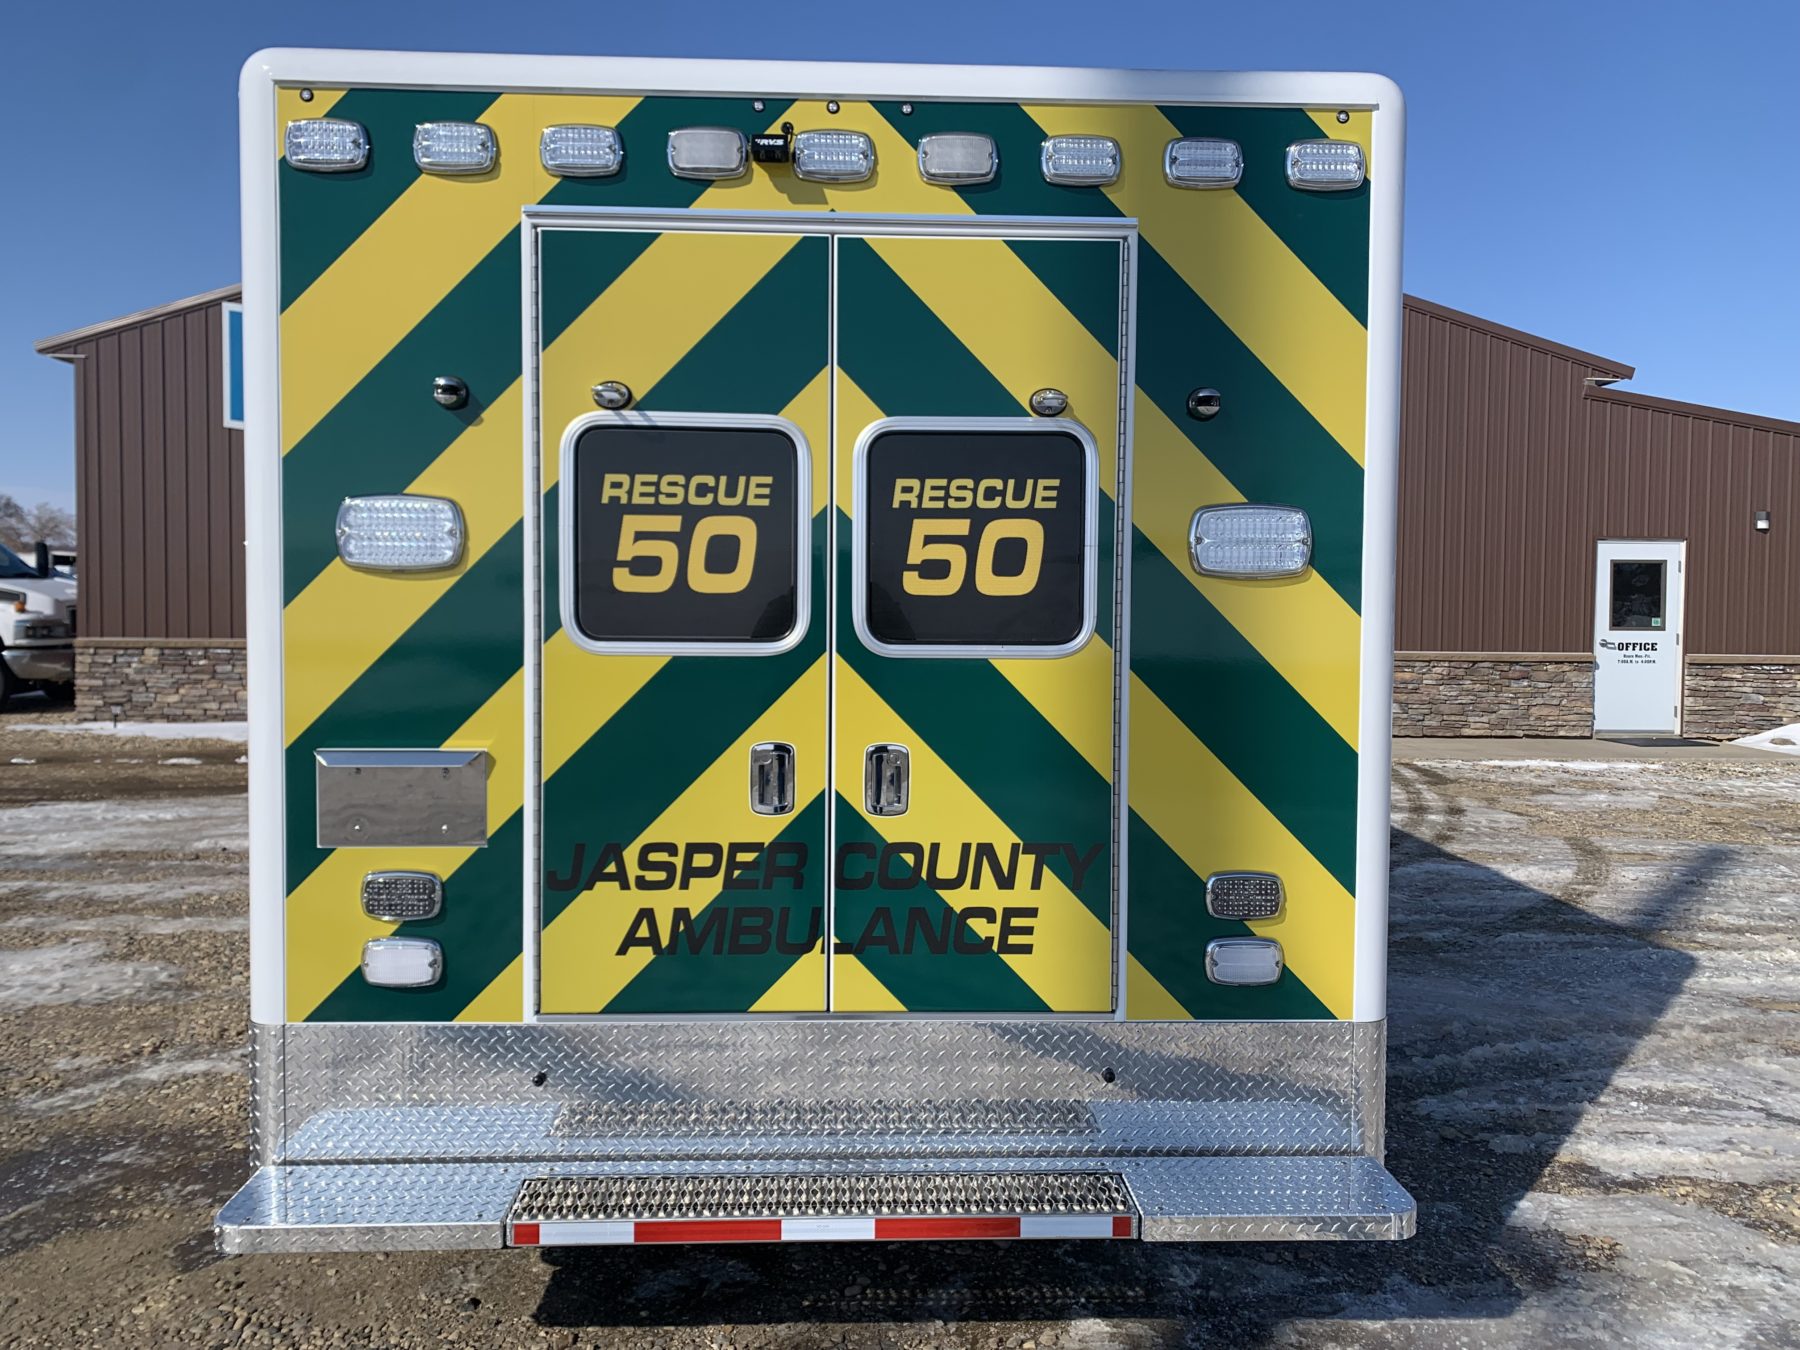 2022 Ram 5500 4x4 Heavy Duty Ambulance For Sale – Picture 7